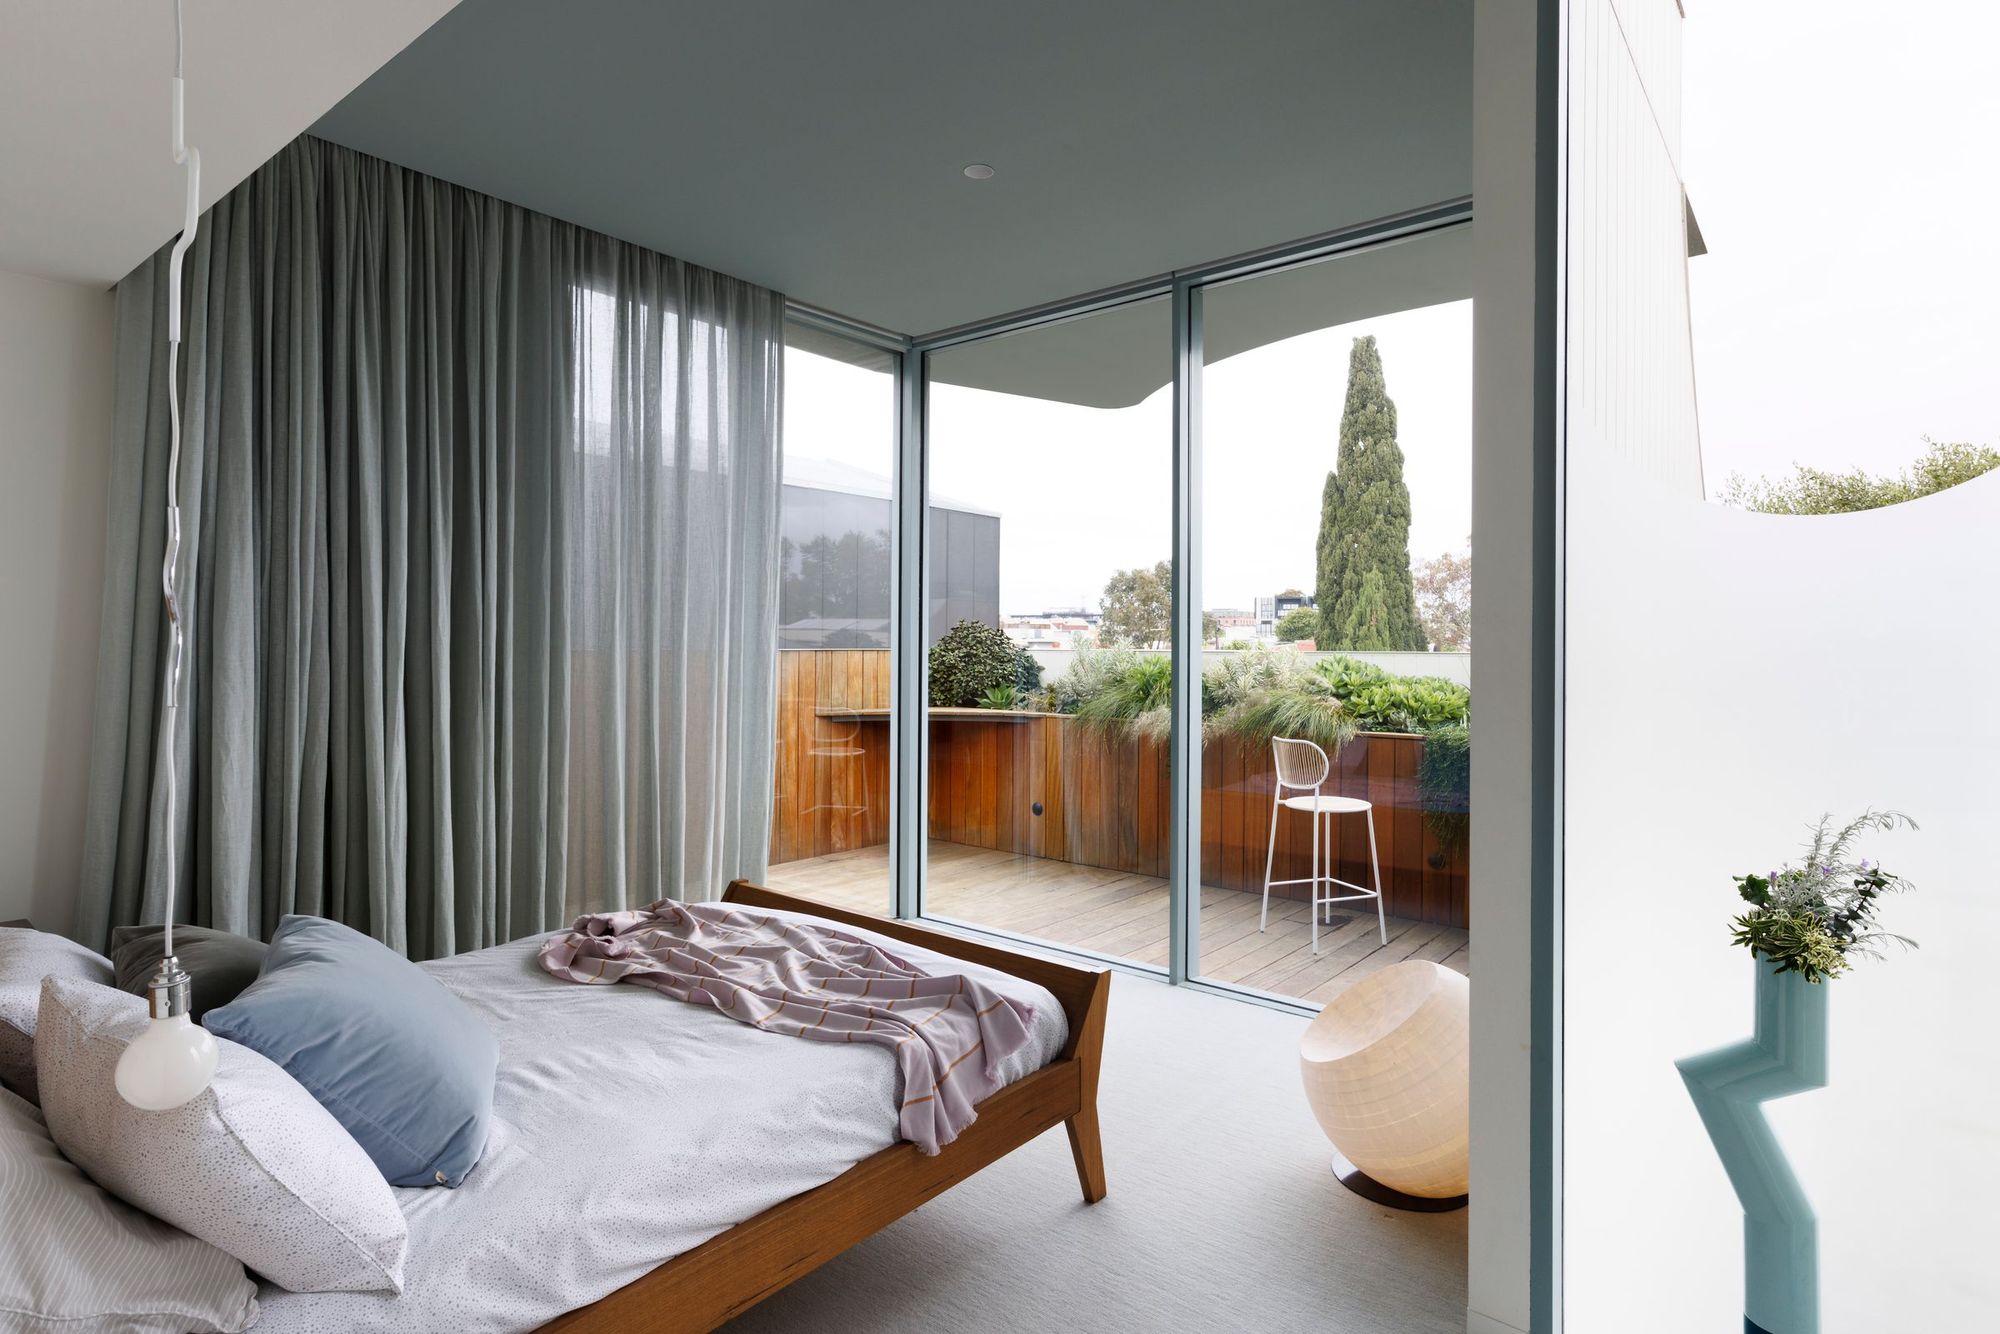 Tiara House by FMD Architects. Master bedroom suite with view out to deck